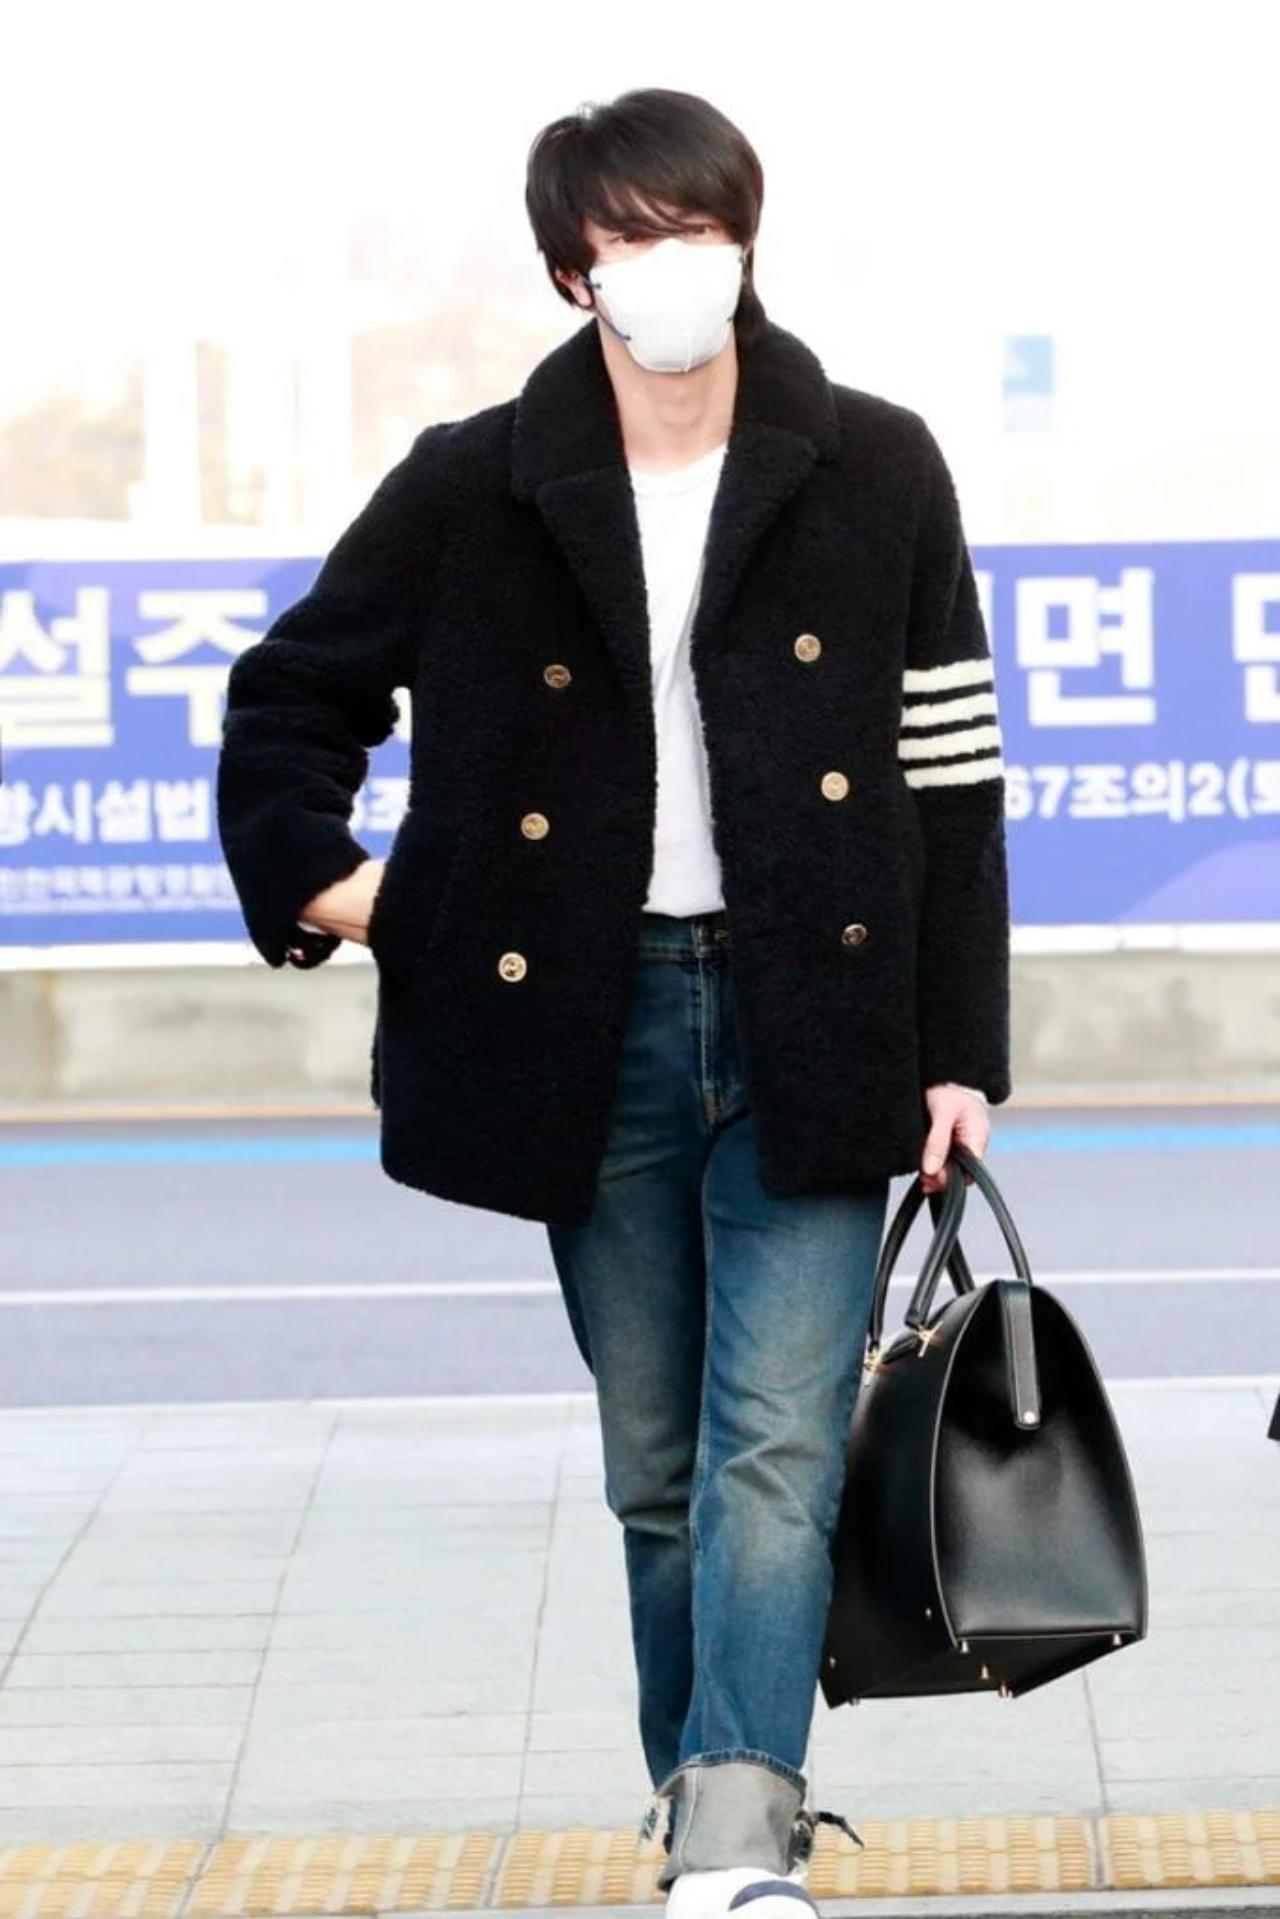 But let's admit it, Jin isn't extra every single time when it comes to his sartorial choices. For instance, how cute does he look in this cosy oversized black coat at the airport?